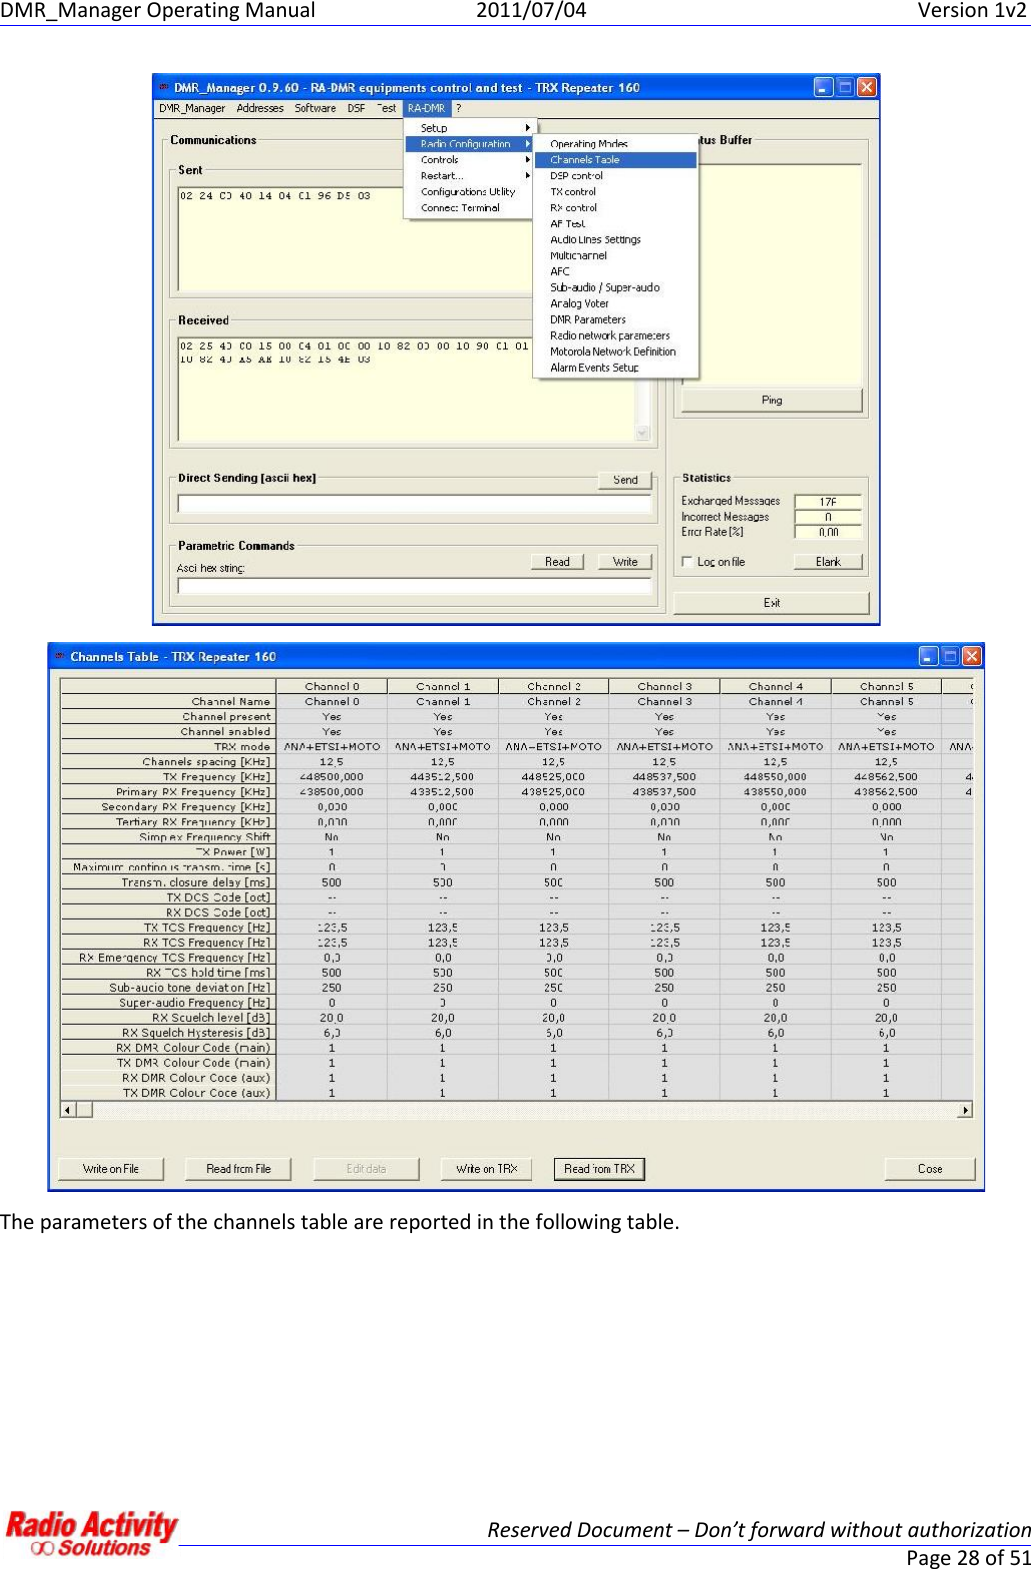 DMR_Manager Operating Manual 2011/07/04 Version 1v2Reserved Document – Don’t forward without authorizationPage 28 of 51The parameters of the channels table are reported in the following table.